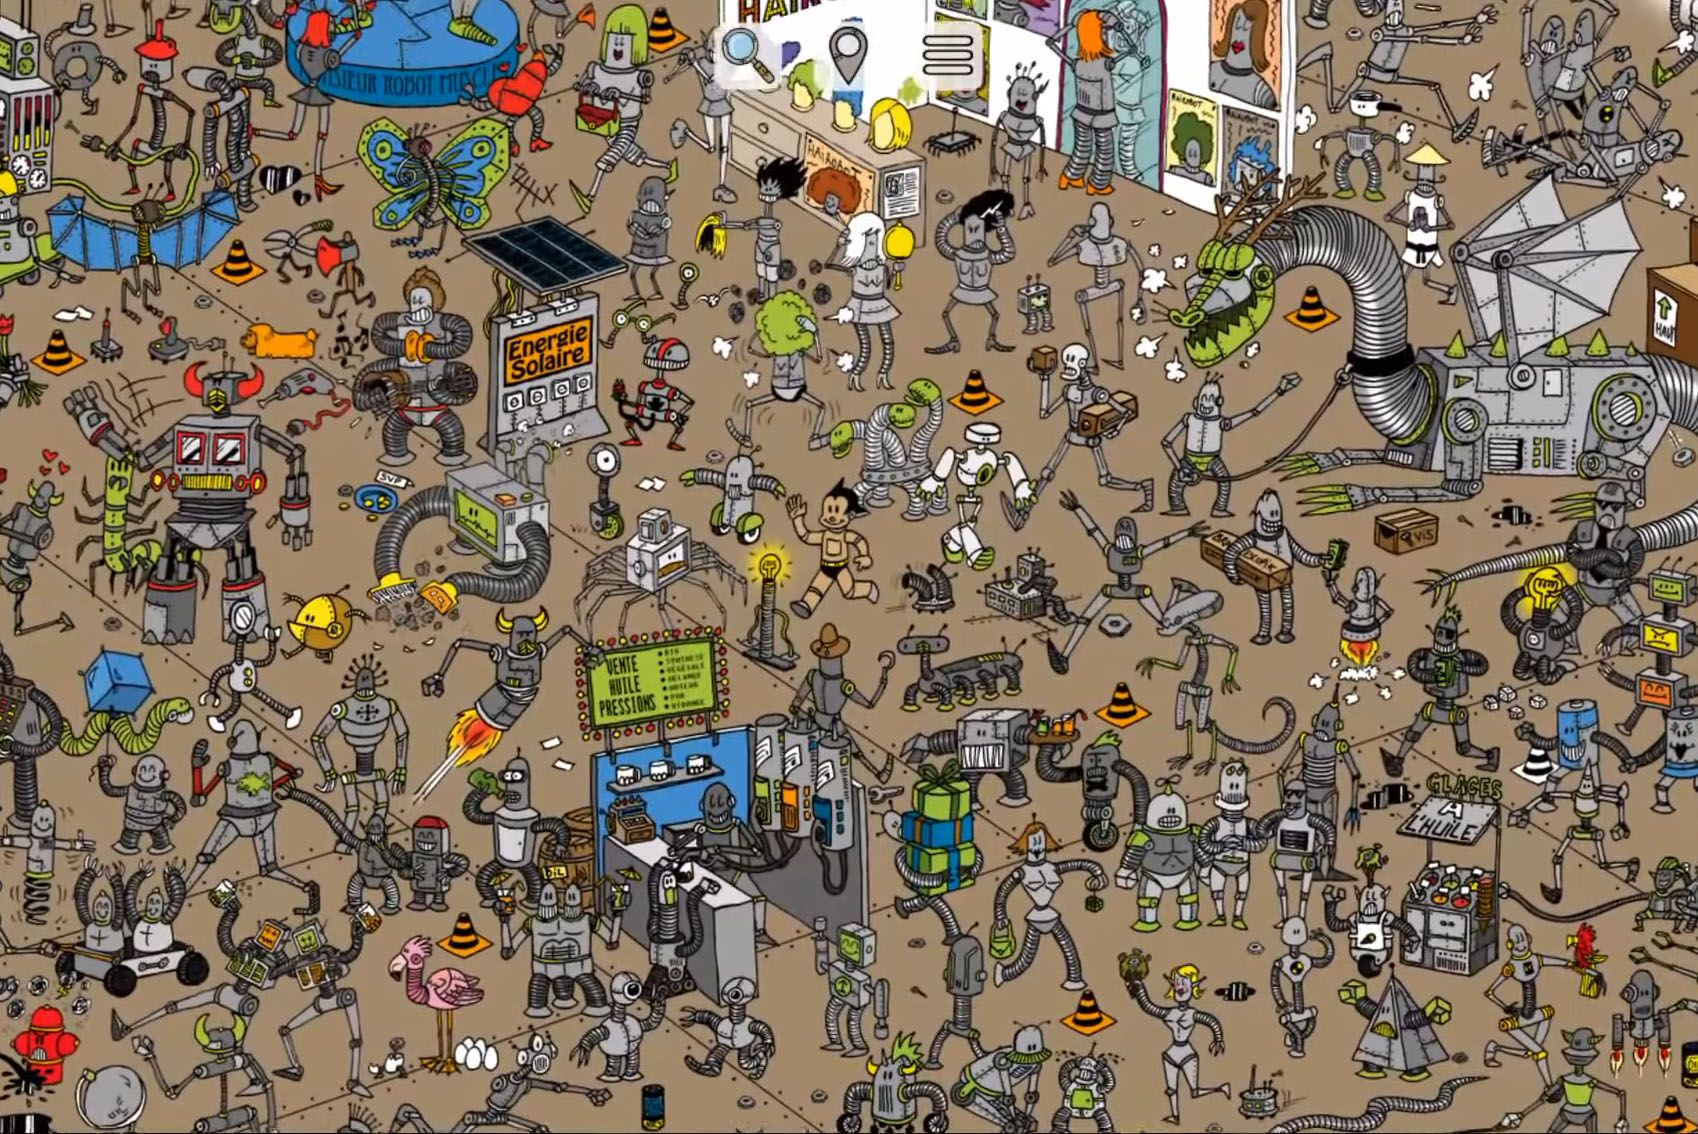 Where’s Droid? for Android